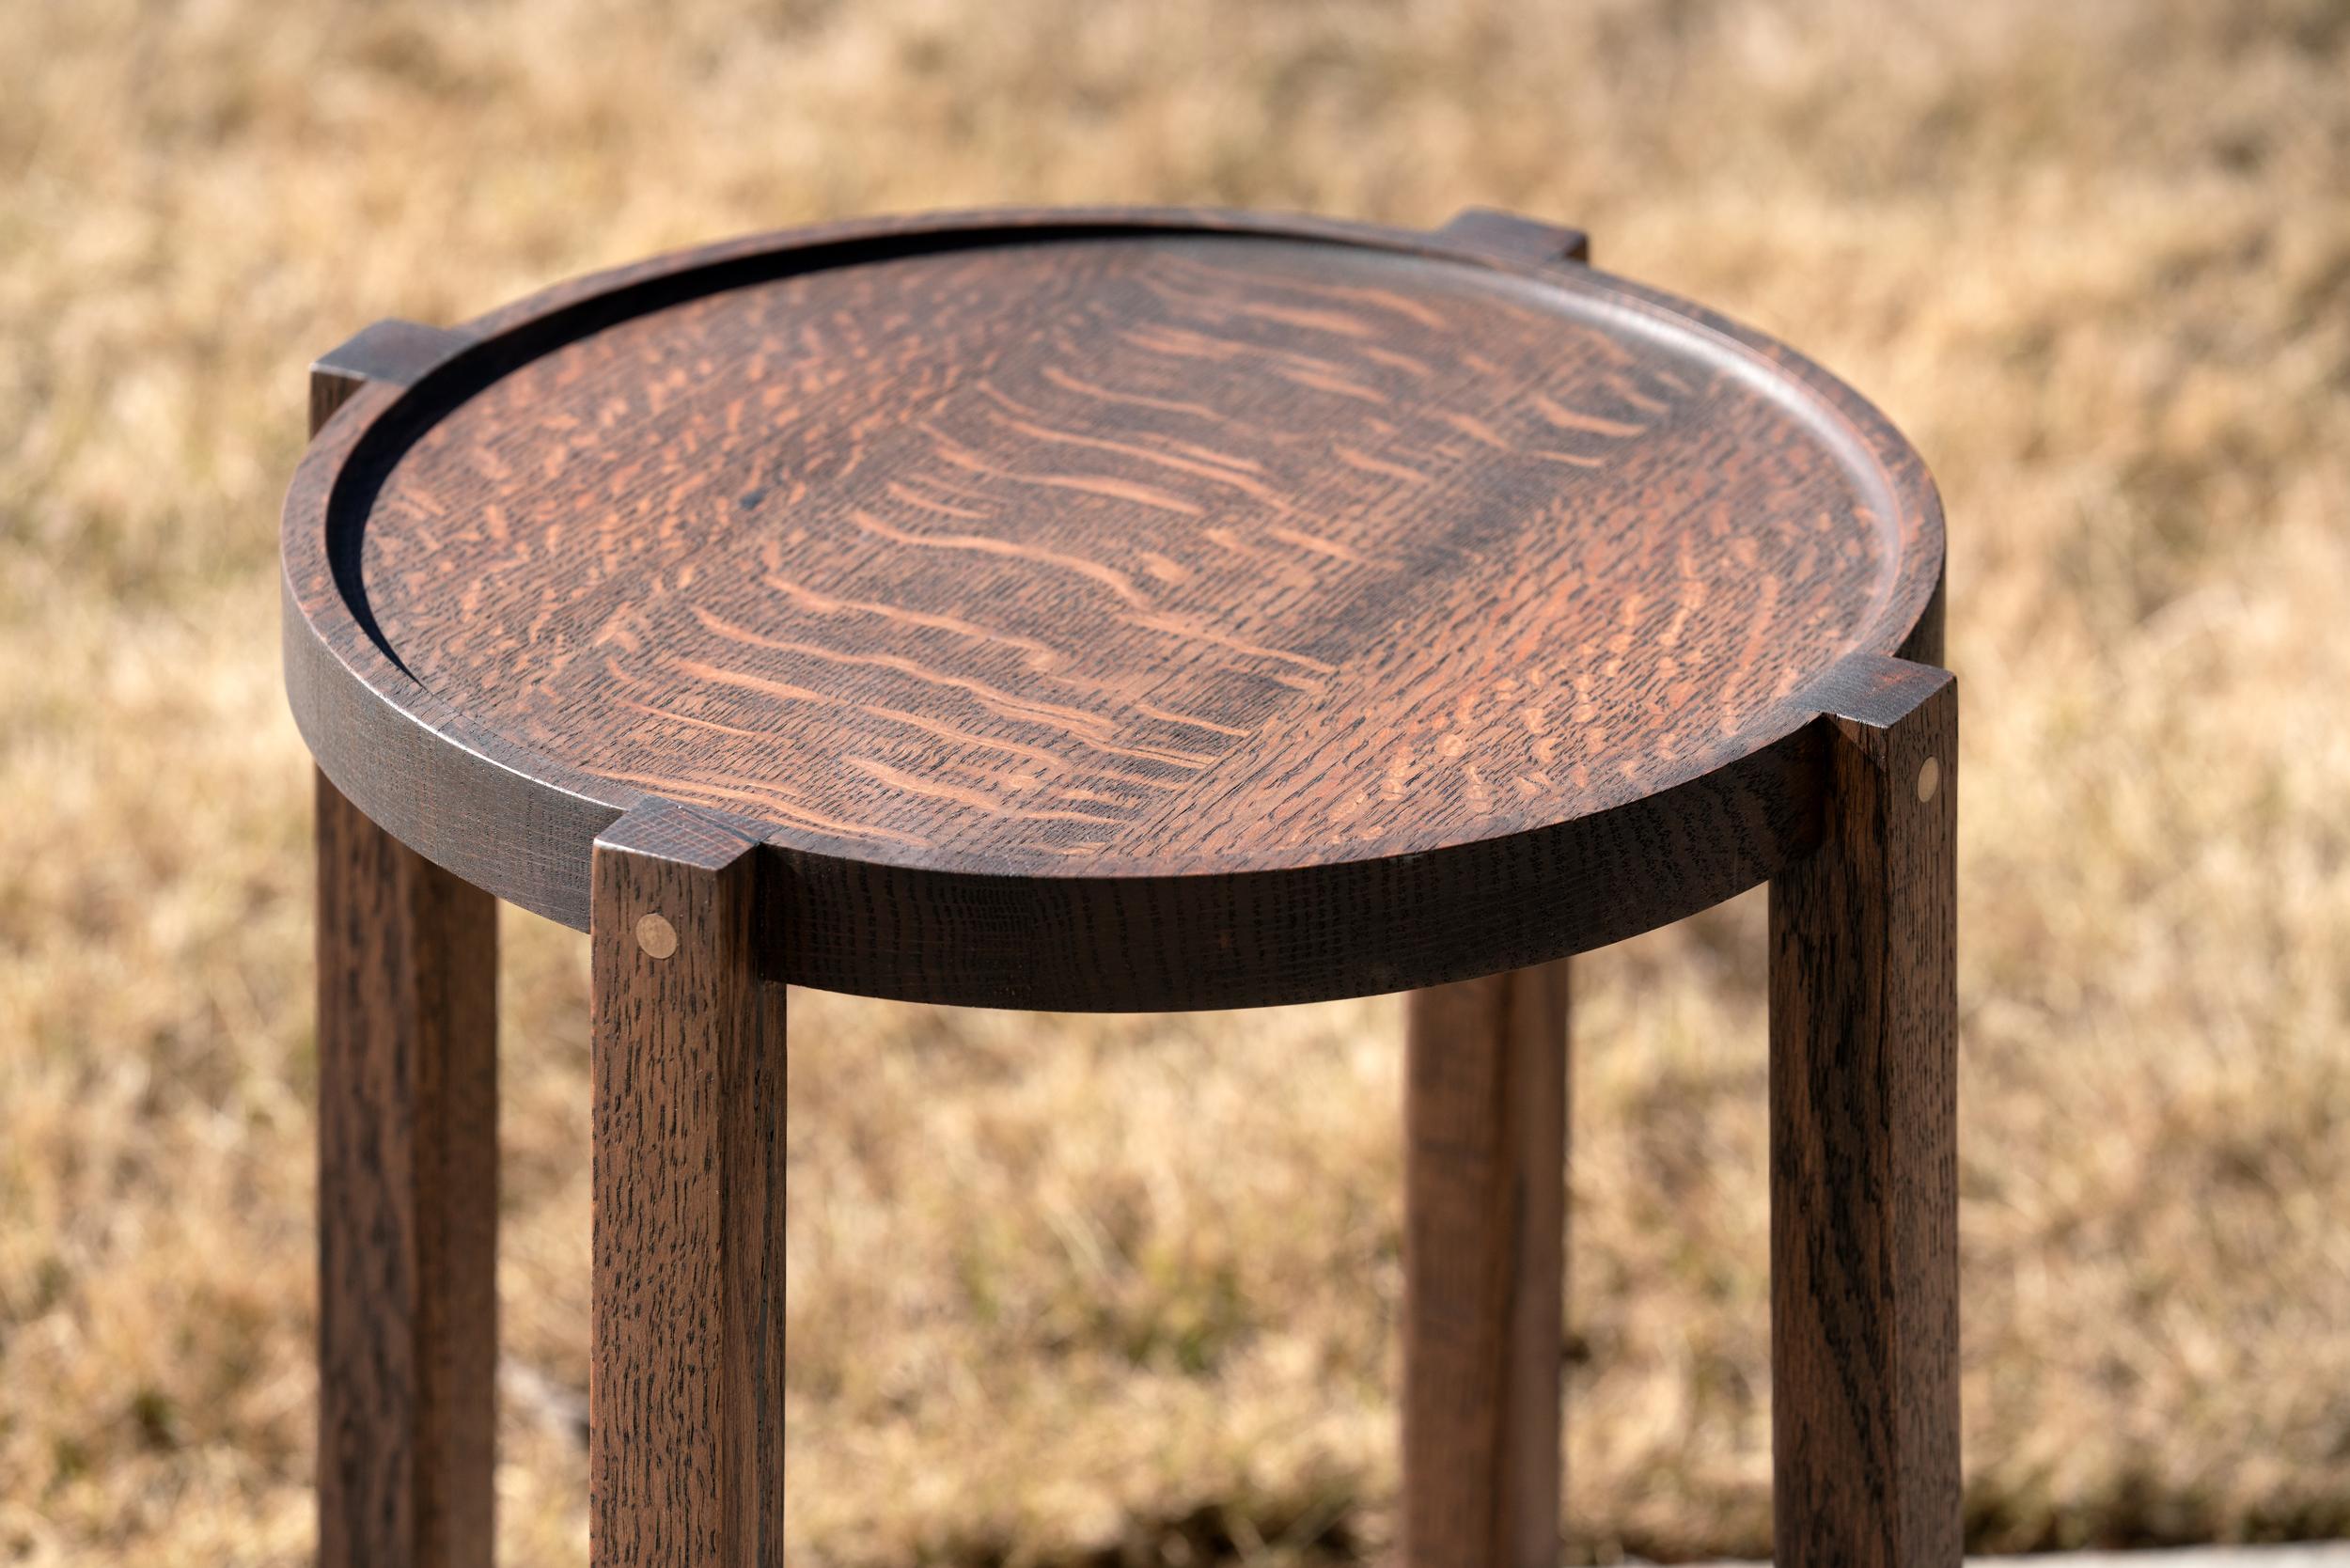 We call this Round Side Table Black Oak with Brass Details the Waverly table. This table is made of the finest repurposed urban timber and is so versatile. Sturdy yet lightweight, the Waverly can be easily moved around as a martini table or place to